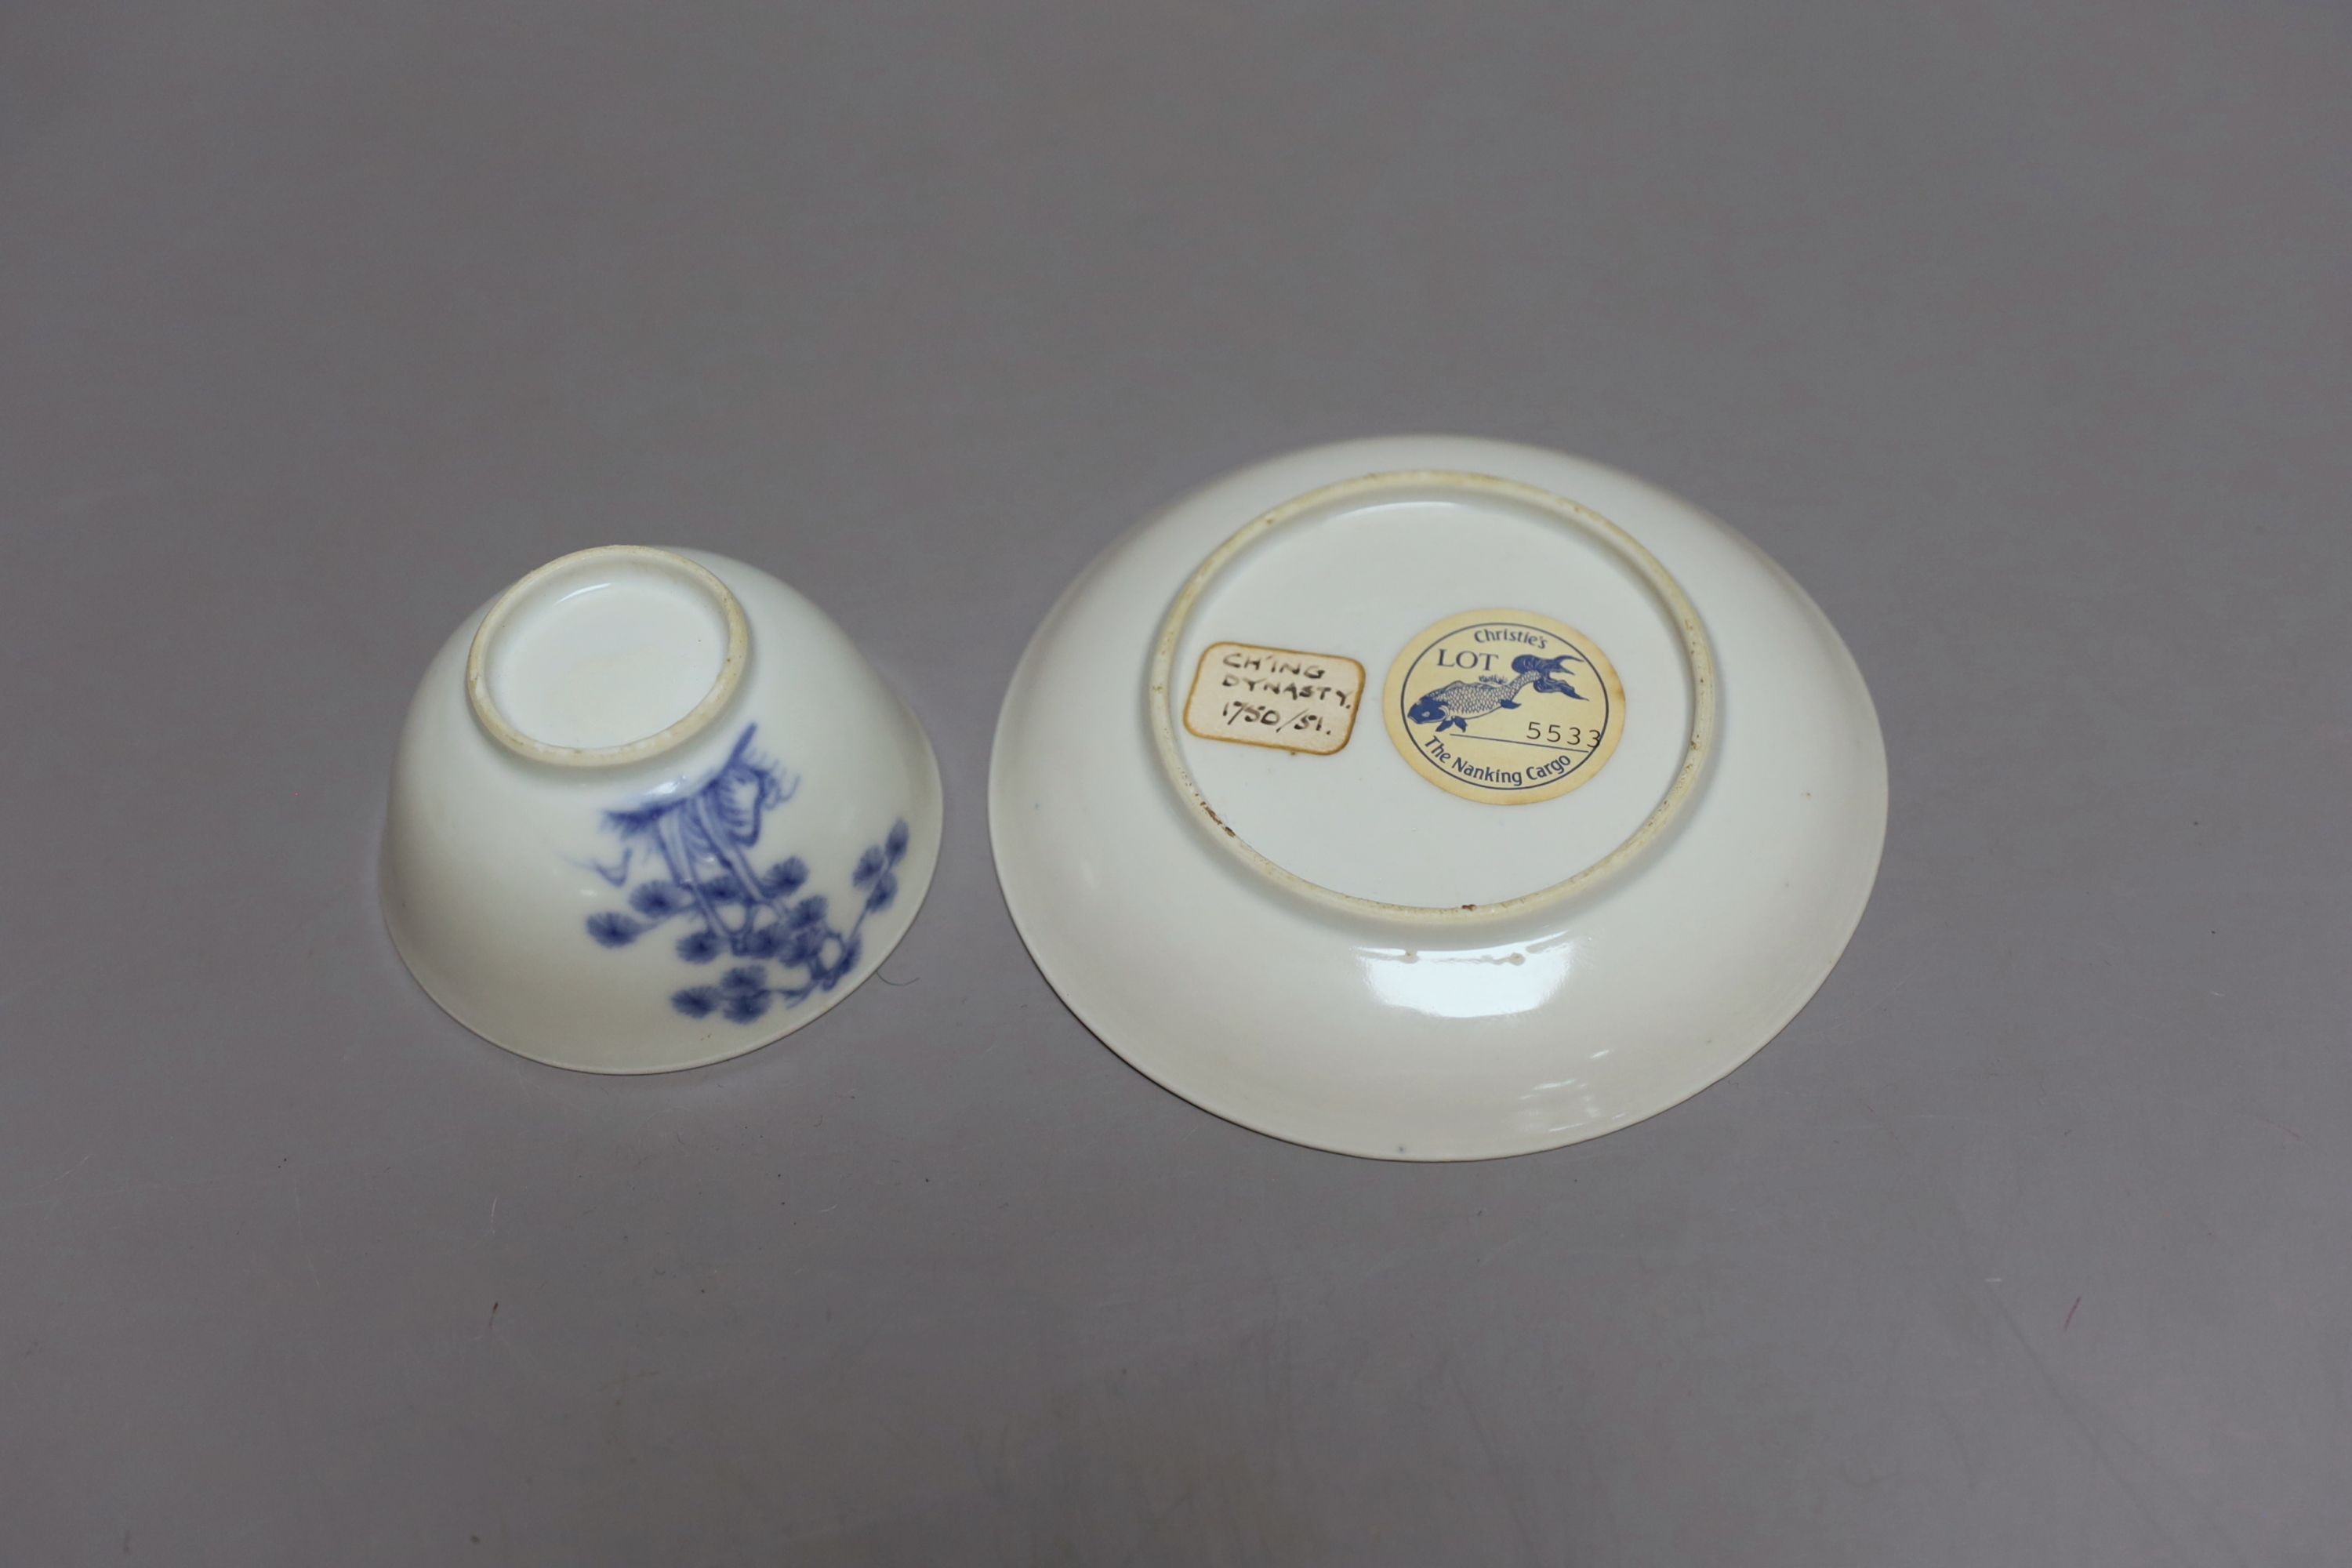 Nanking cargo teabowl and saucer, with receipt - Image 3 of 4